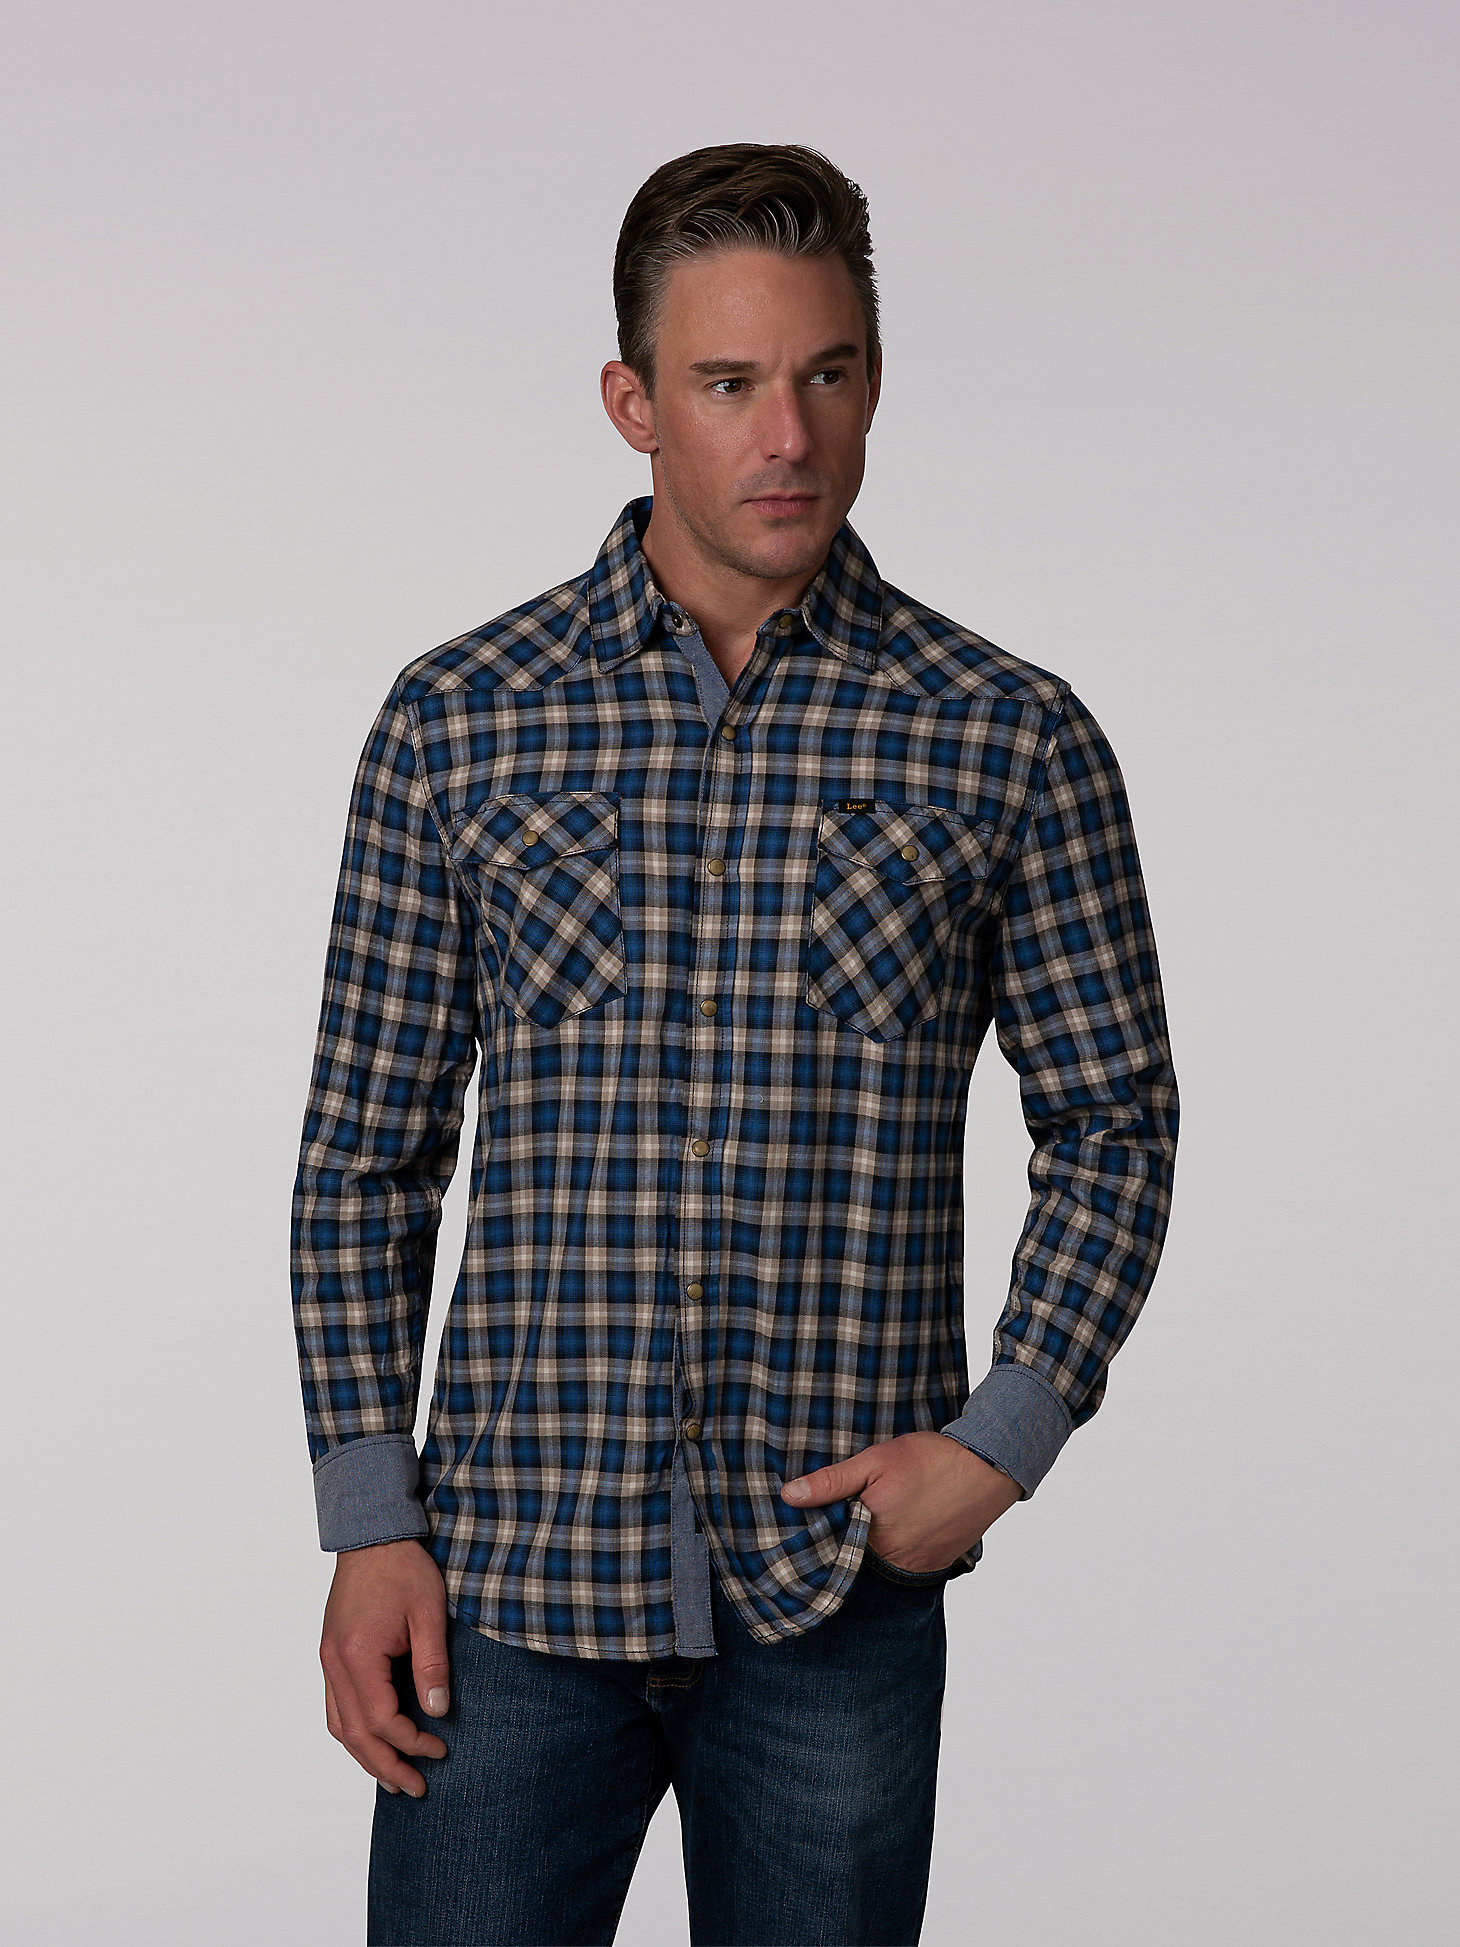 Comaba Mens Short Sleeve Plaid Relaxed-Fit Western Shirt Casual Blouse Tops